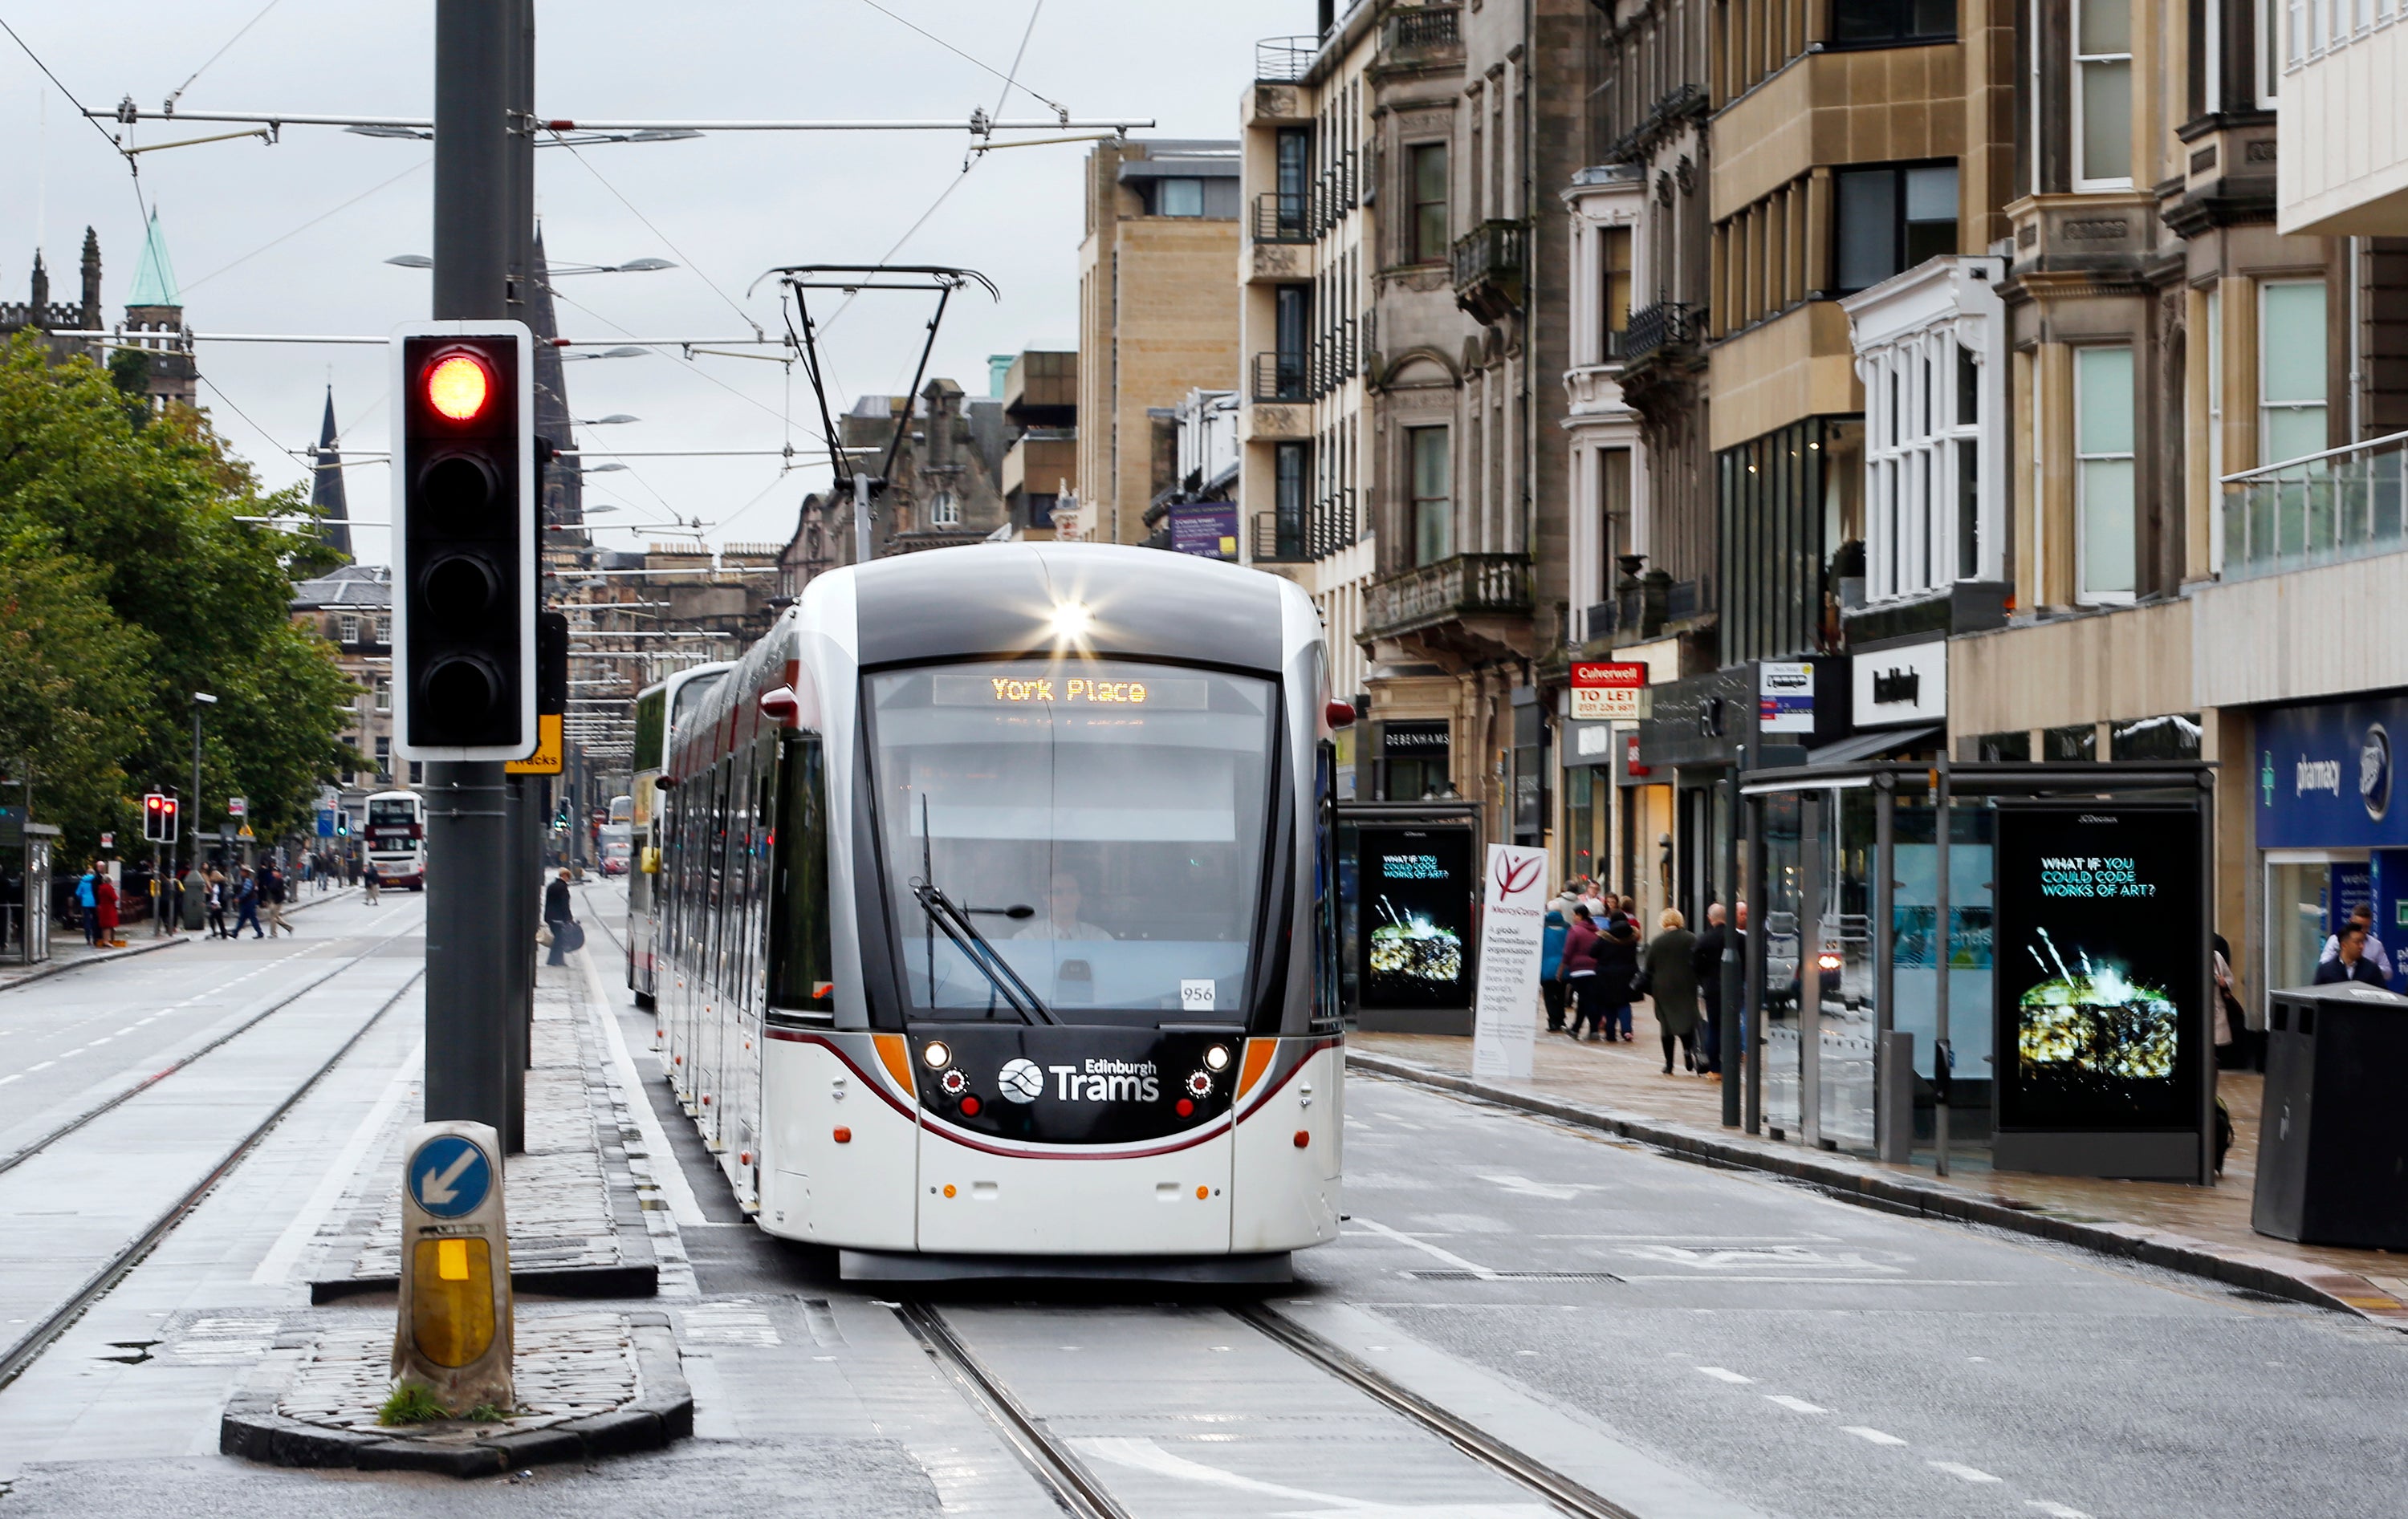 The Edinburgh Tram Inquiry will cost more than £13m, Transport Scotland has projected (Danny Lawson/PA)